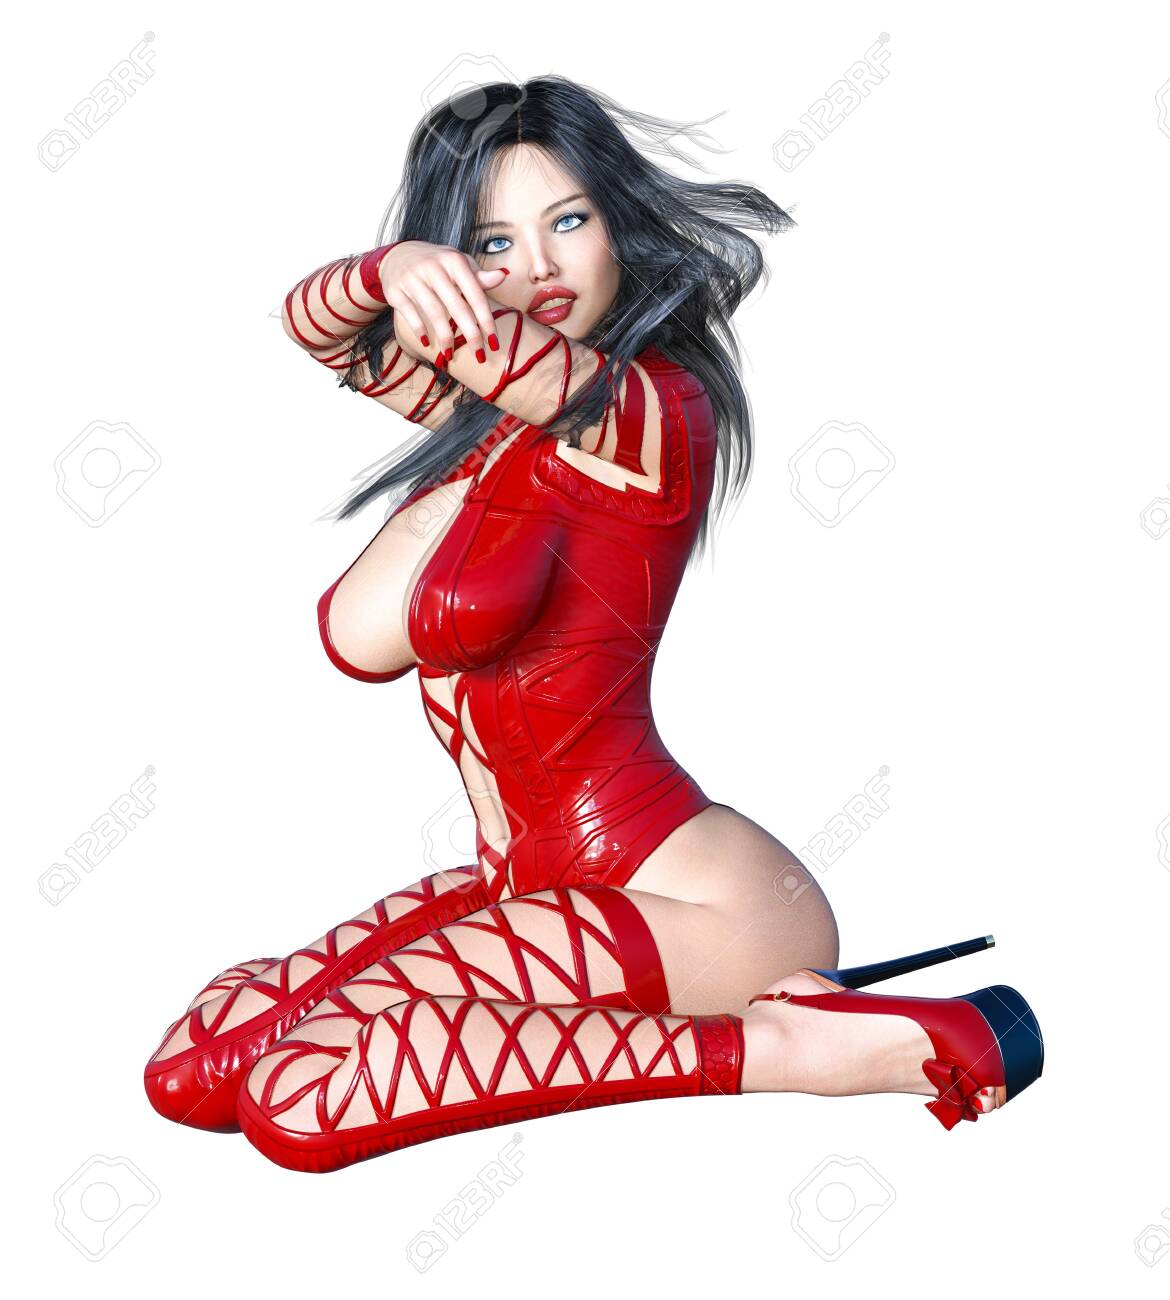 Red Latex Lingerie photo 6